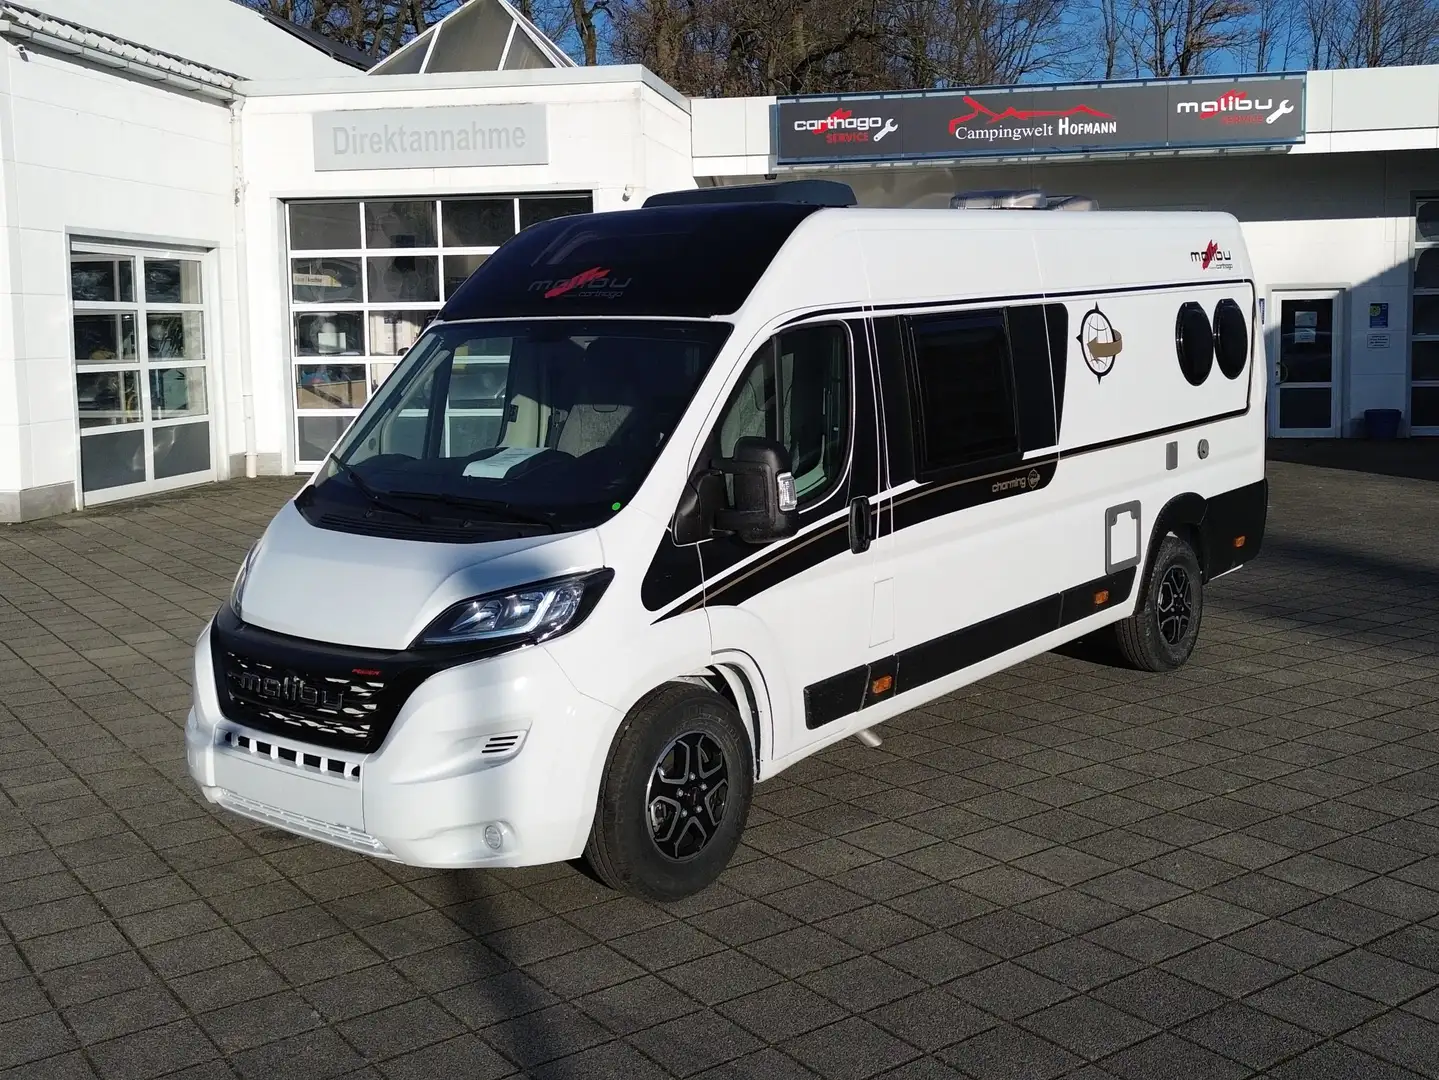 Malibu first class - two rooms GT skyview 640 LE RB Weiß - 1